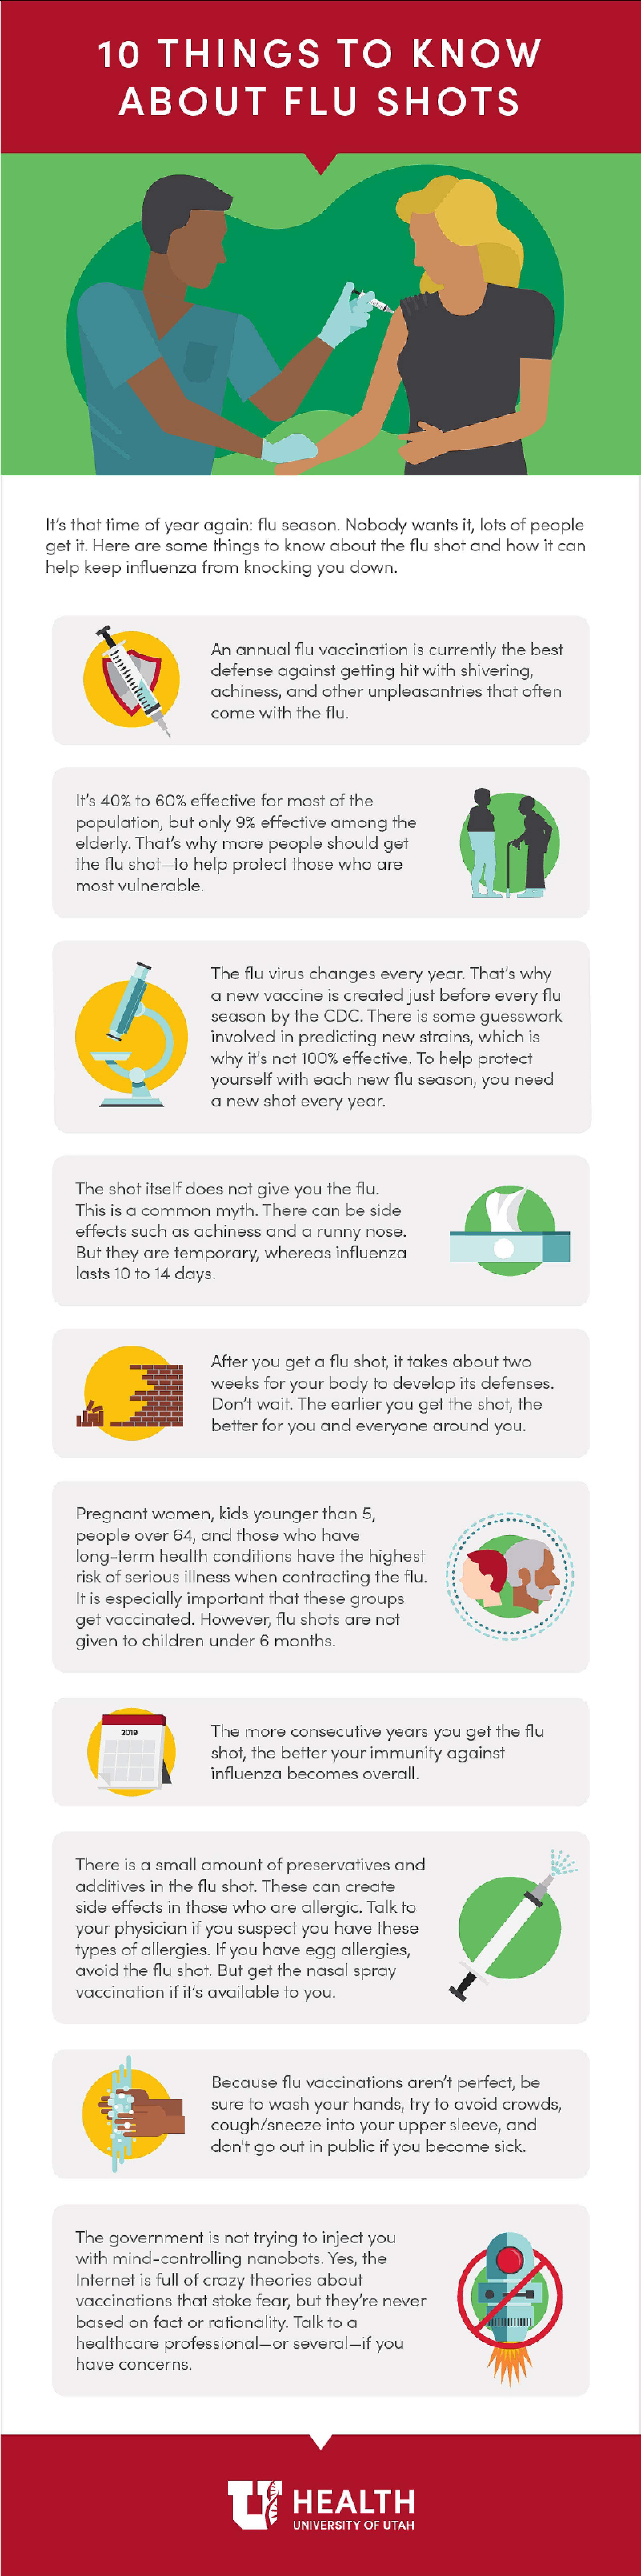 10 Things to Know About Flu Shots Infographic